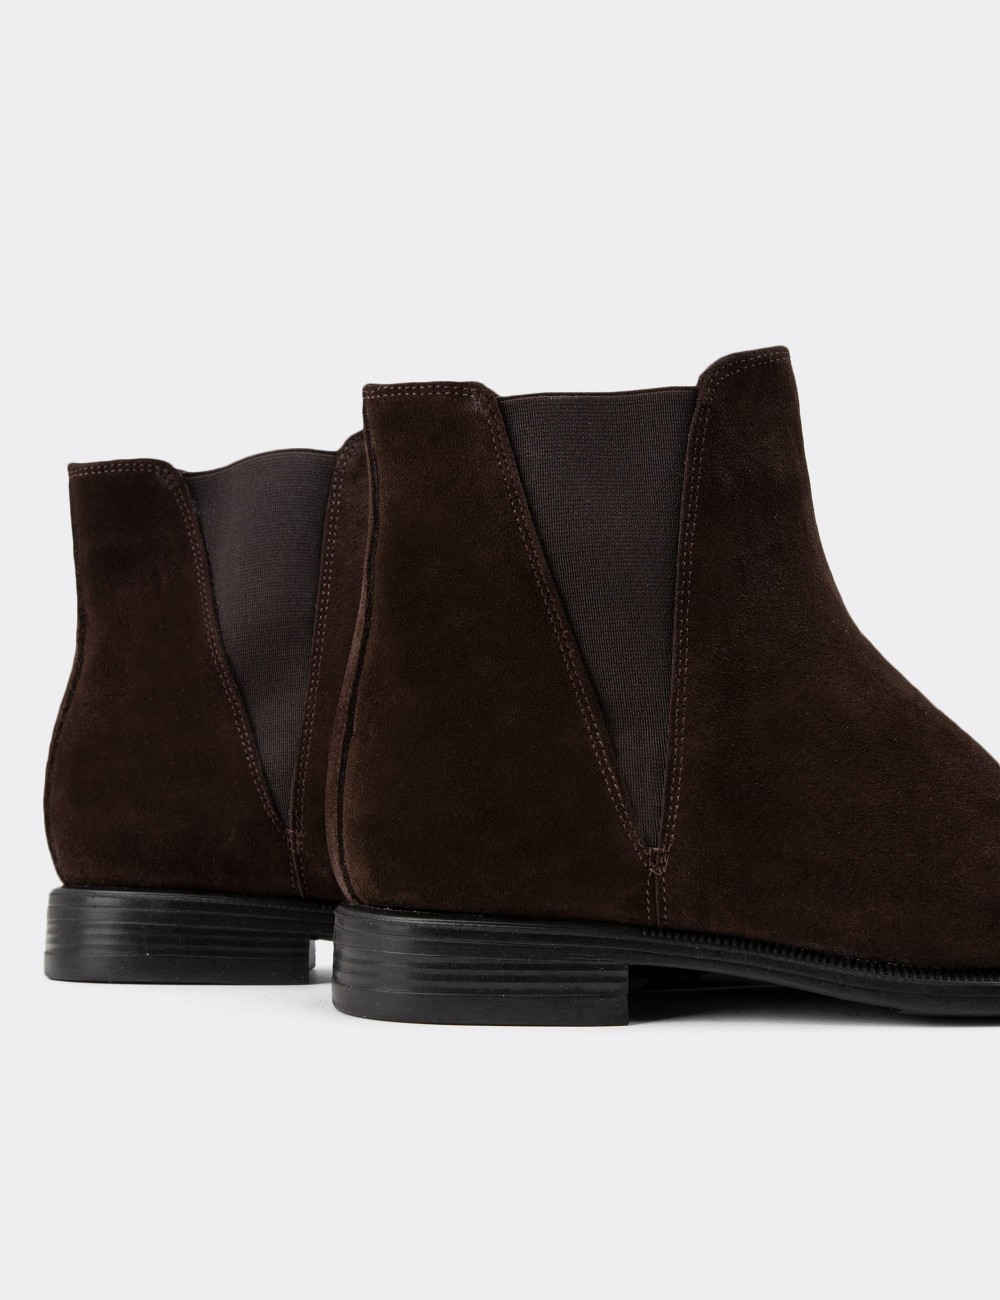 Brown Suede Leather Chelsea Boots - 01689MKHVC02